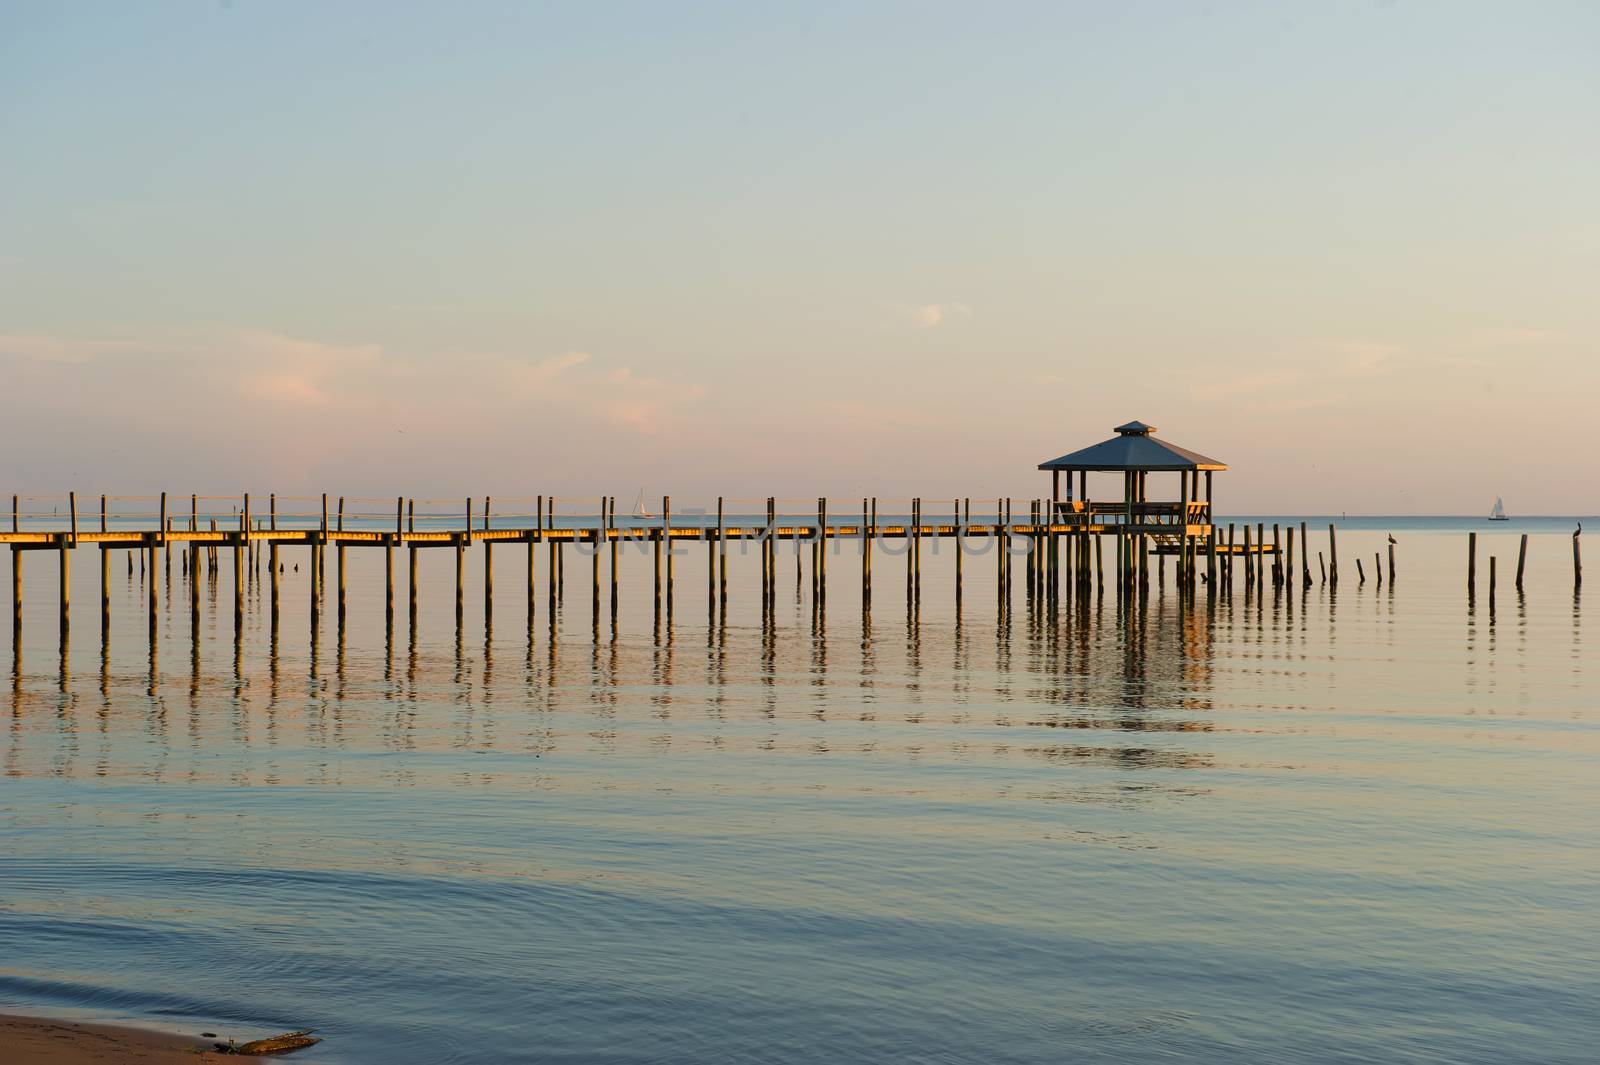 Late Evening Shot of Pier on Bay with calm water and sailboat in the distance